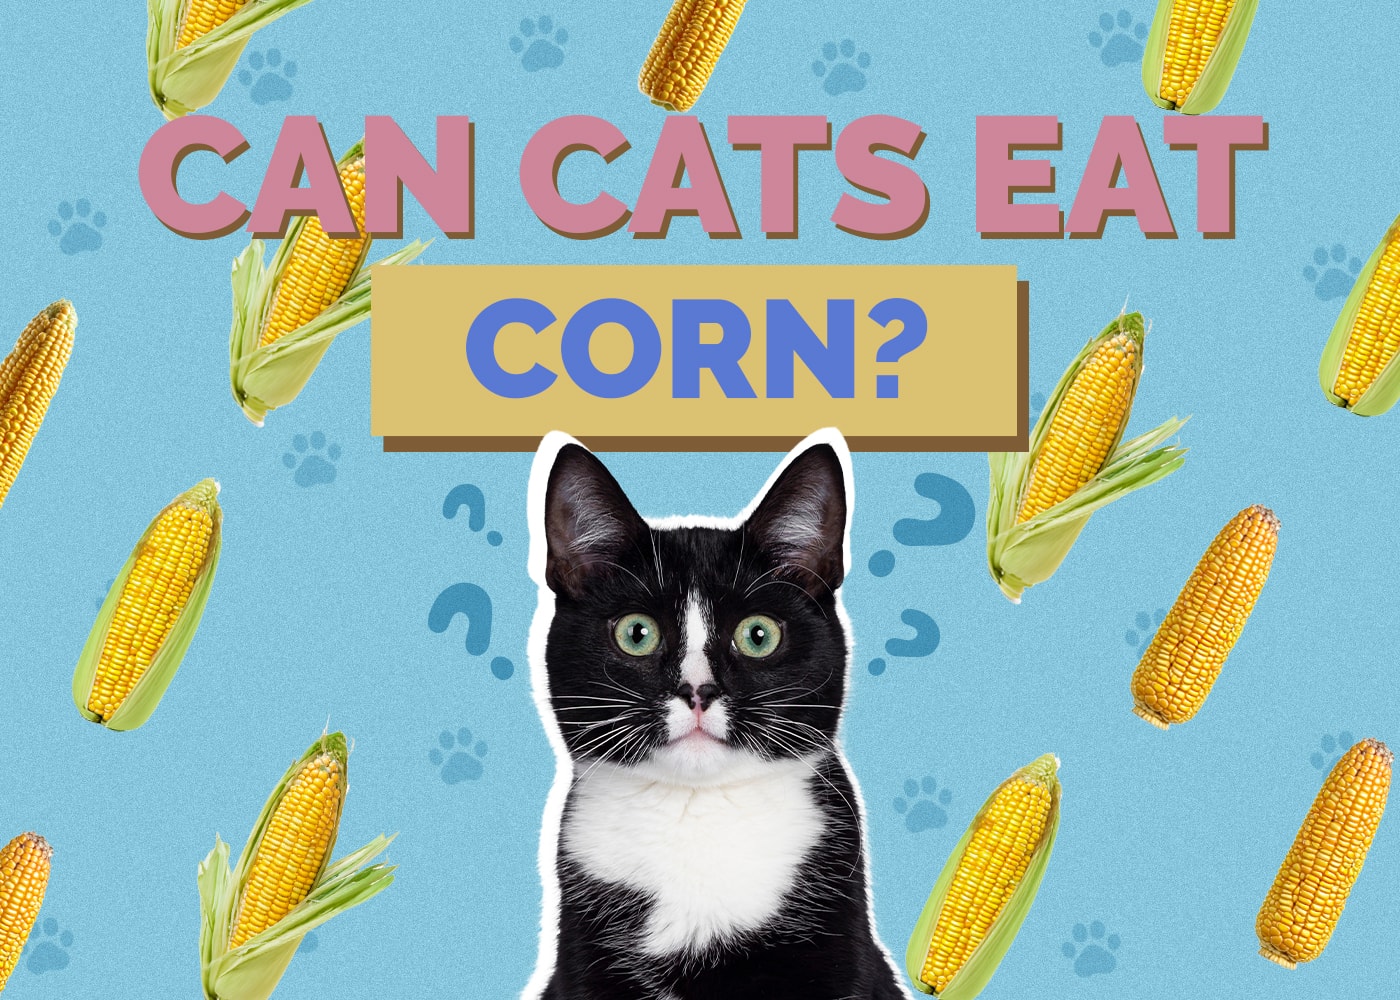 Can Cats Eat corn